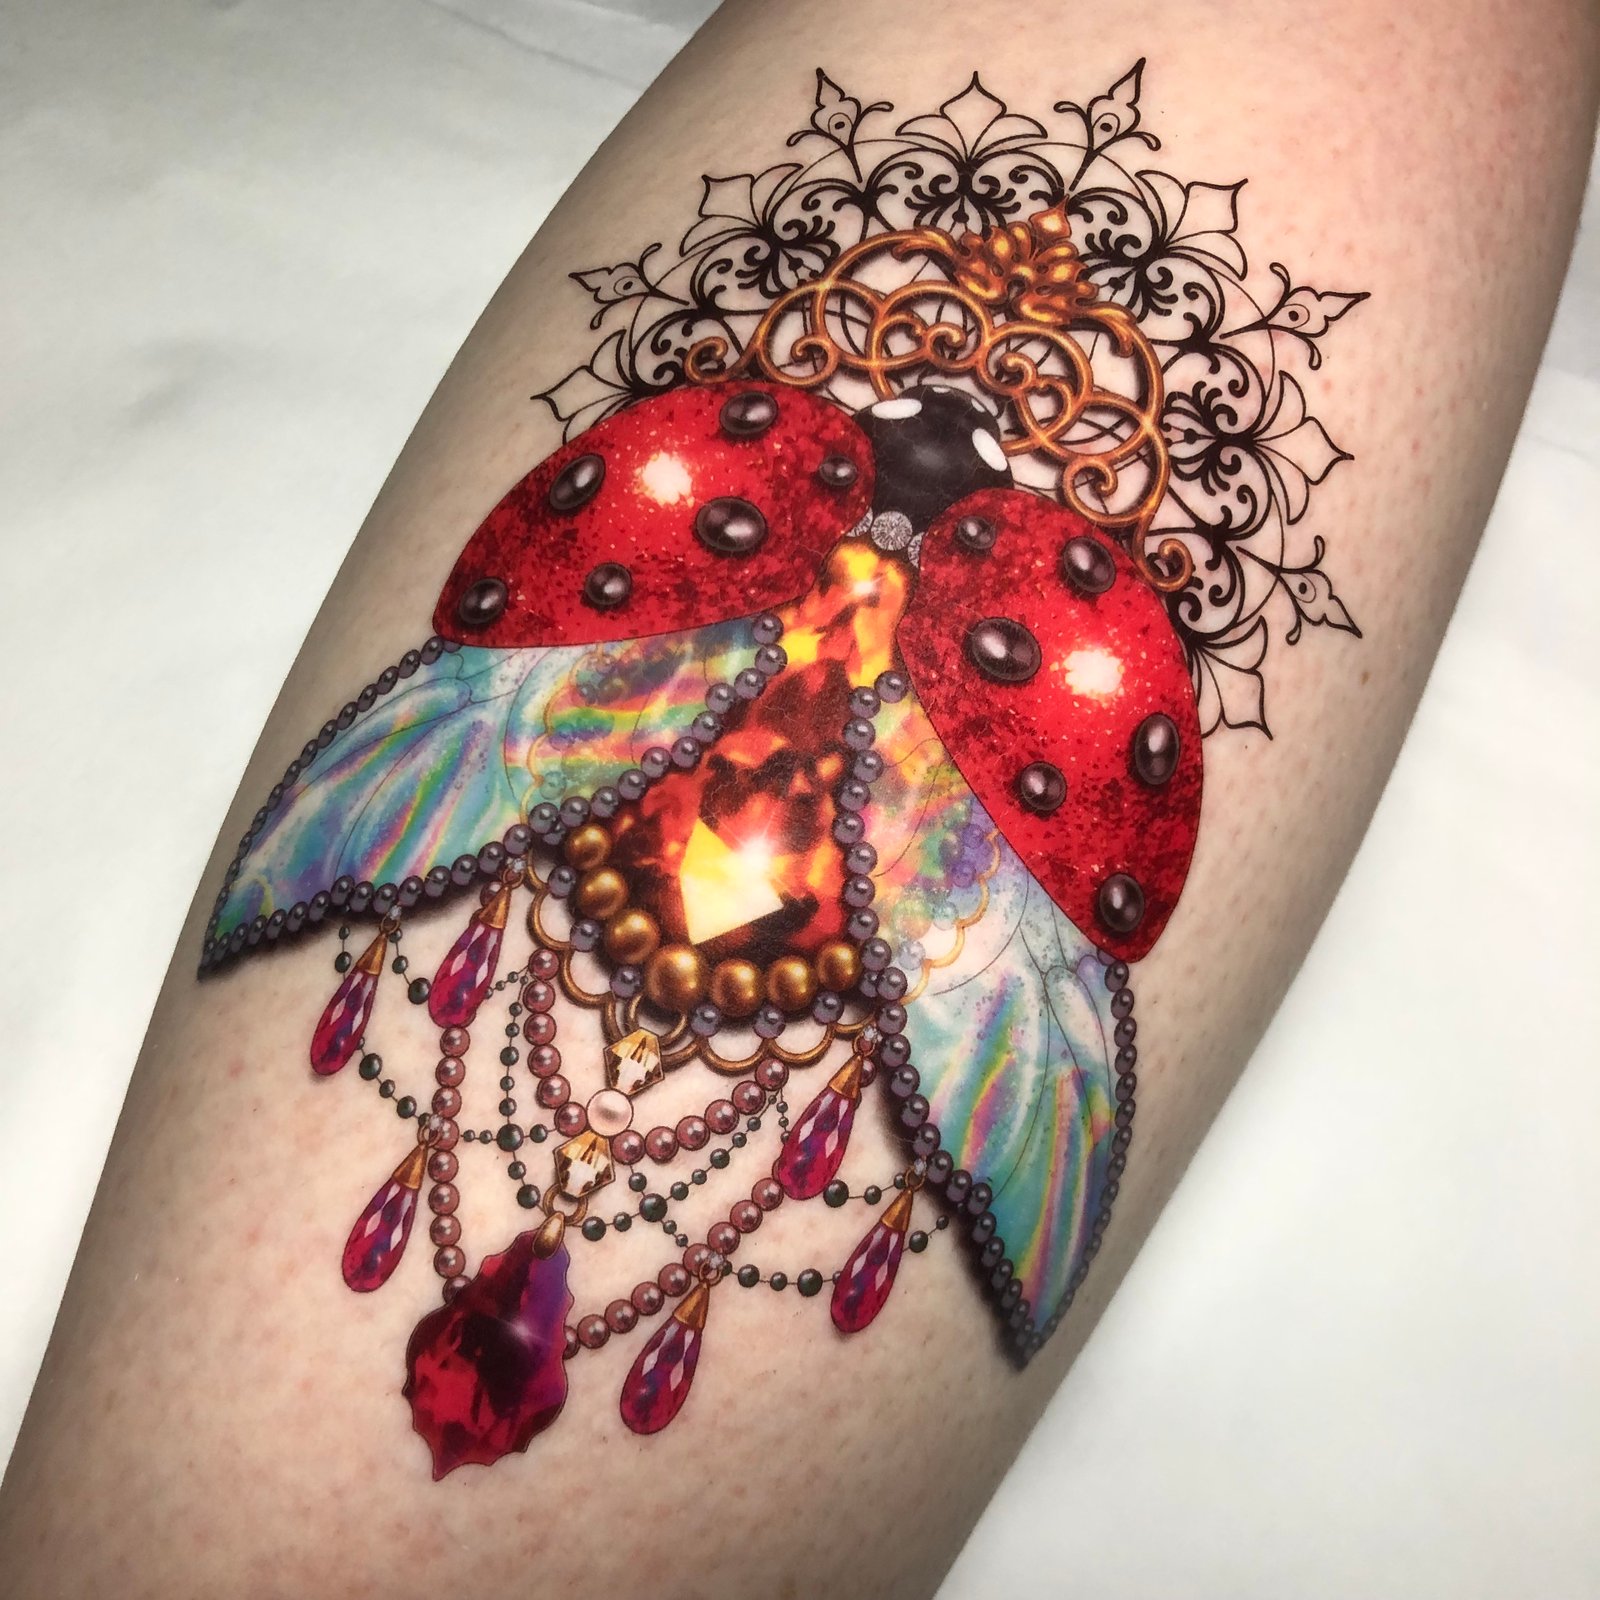 Body - Tattoo's - This flower ladybug tattoo idea!!!! This is it!!! -  TattooViral.com | Your Number One source for daily Tattoo designs, Ideas &  Inspiration